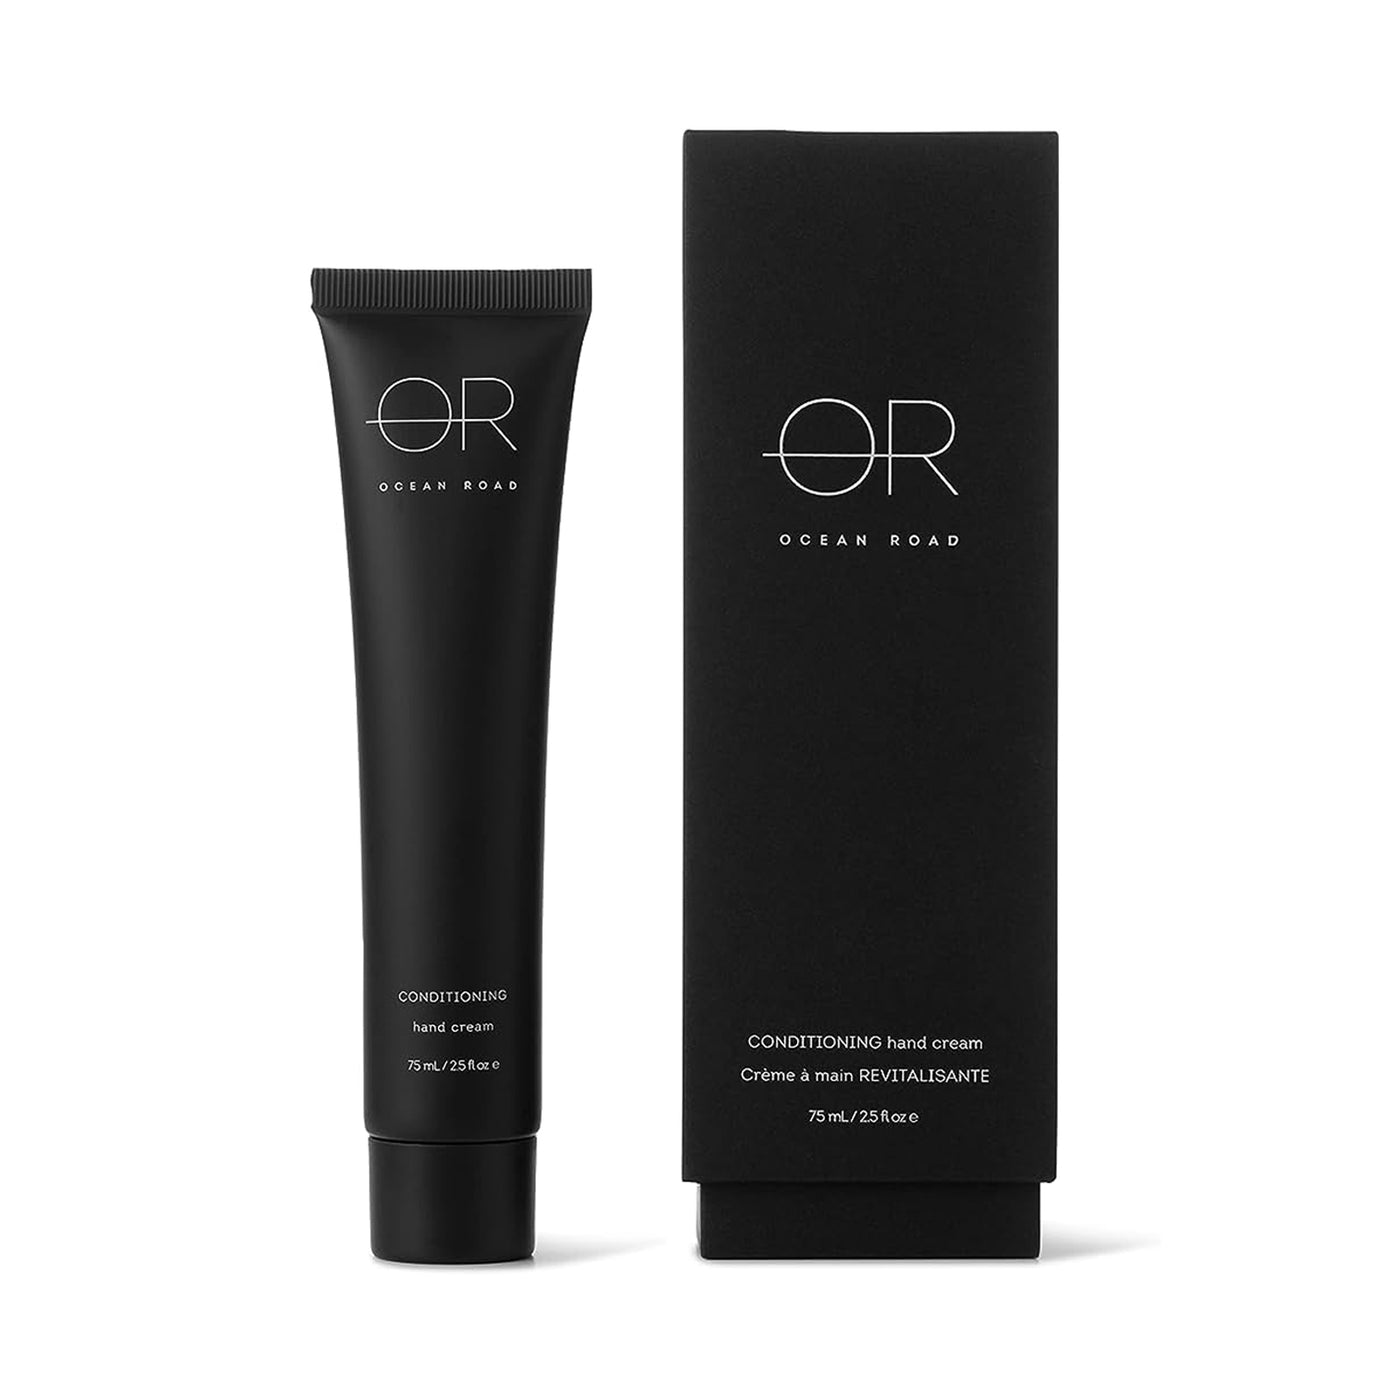 Ocean Road Black Conditioning Hand Cream 75ml with packaging